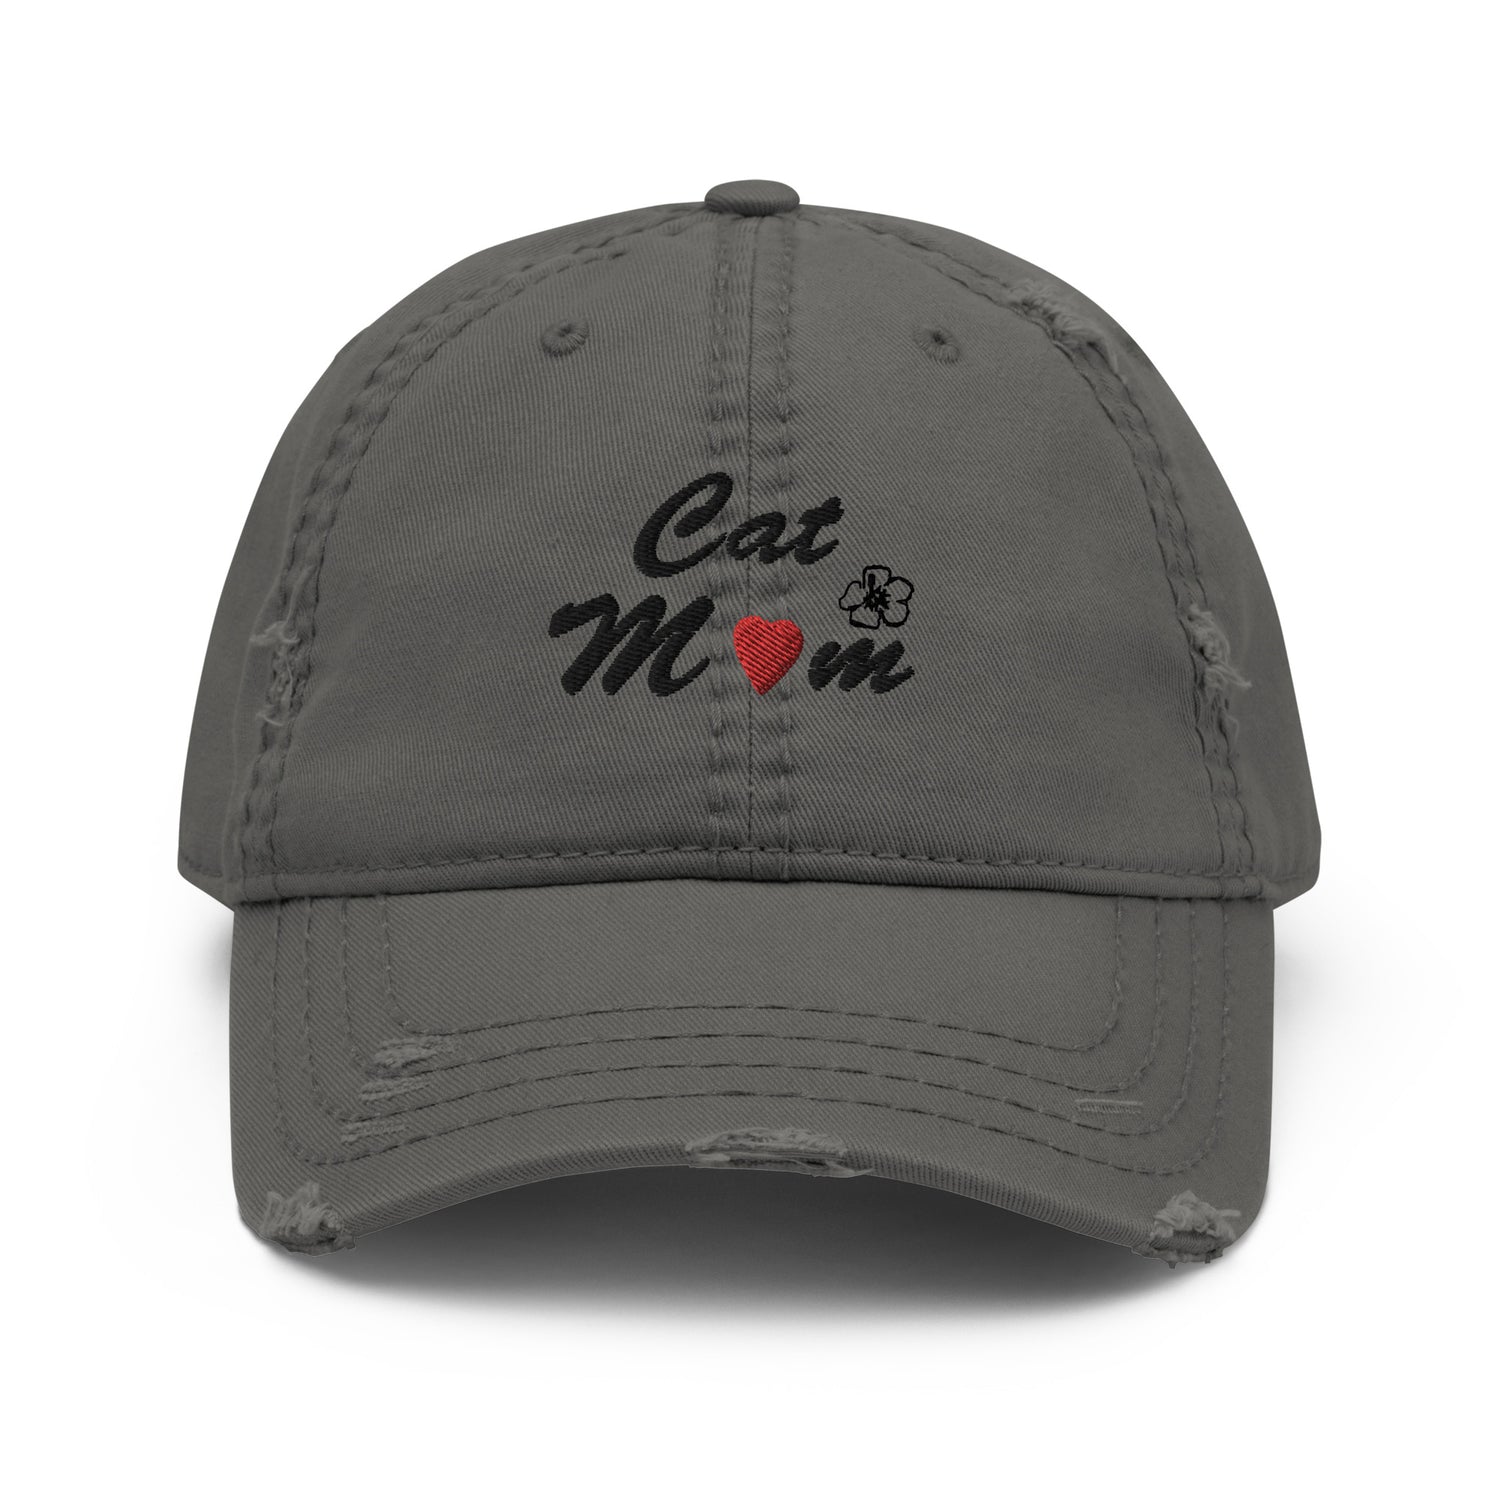 Adjustable Embroidered Distressed Hat for Cat Moms